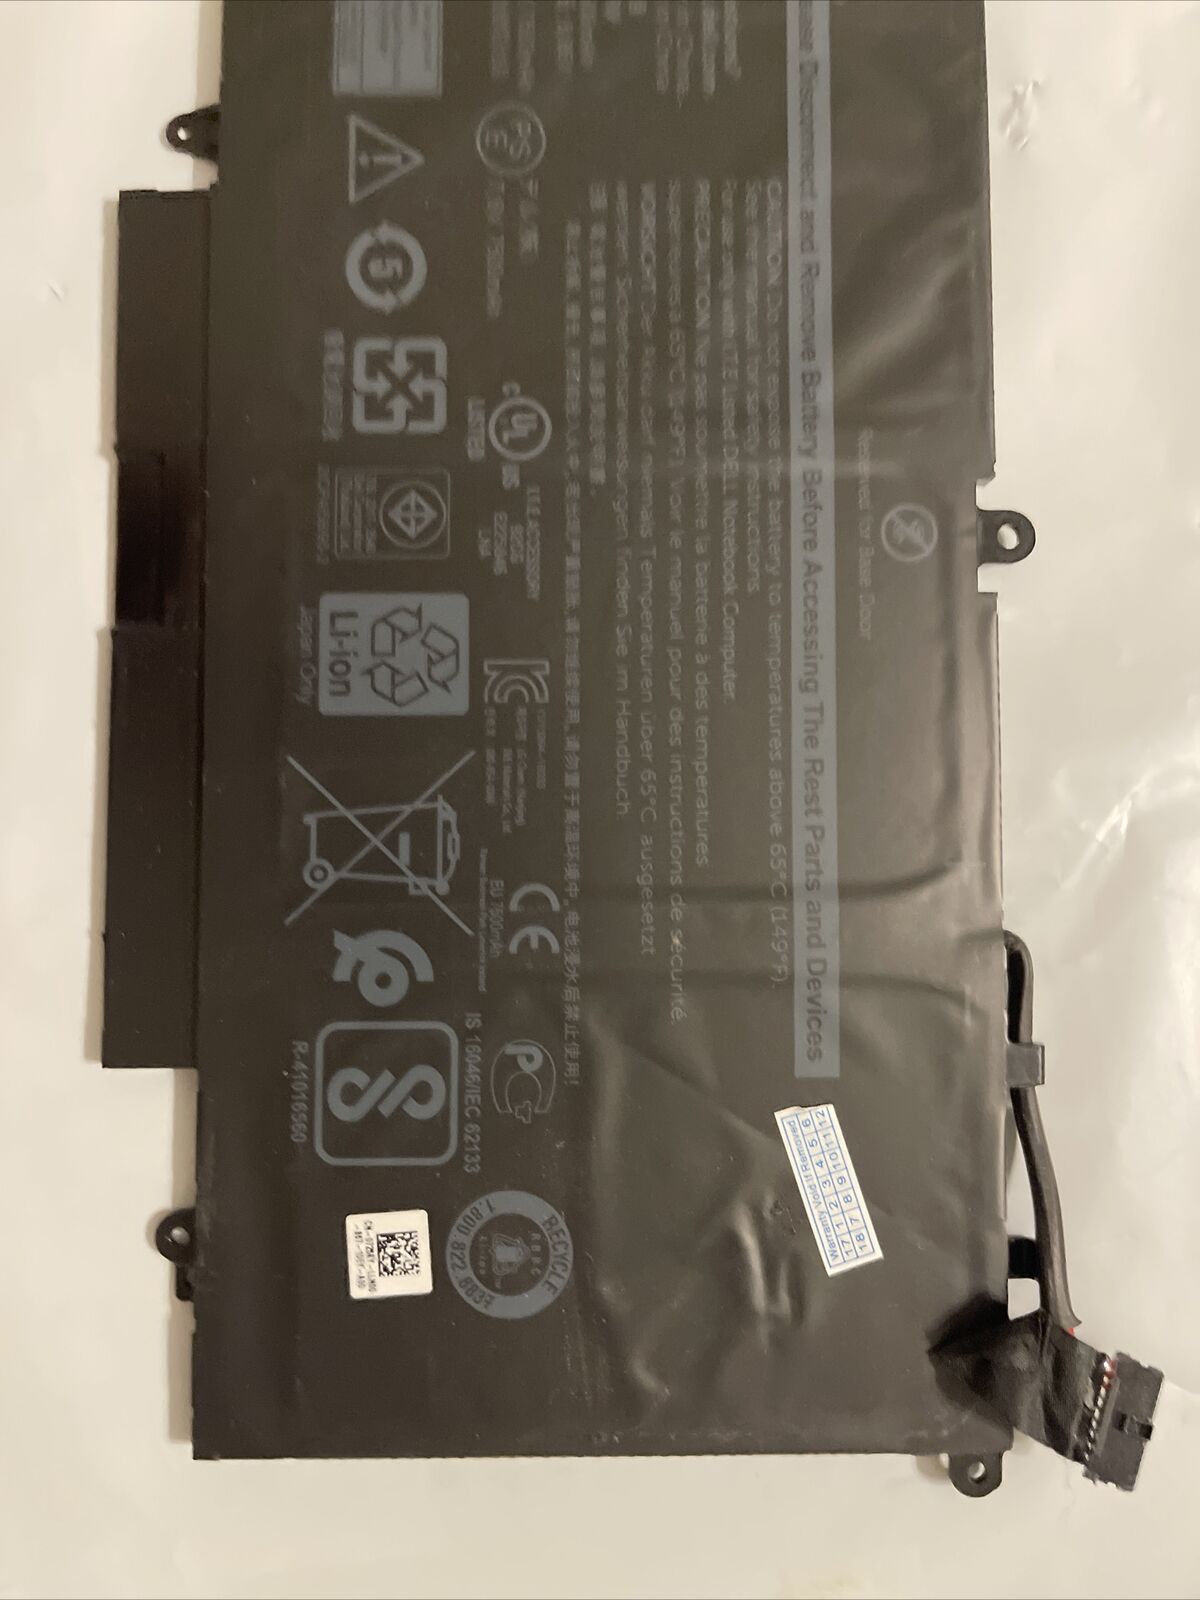 As-Is 60Wh DellLaptop Battery 5285 5289 7389 7390 2-in-1 725KY N18GG 6CYH6 K5XWW